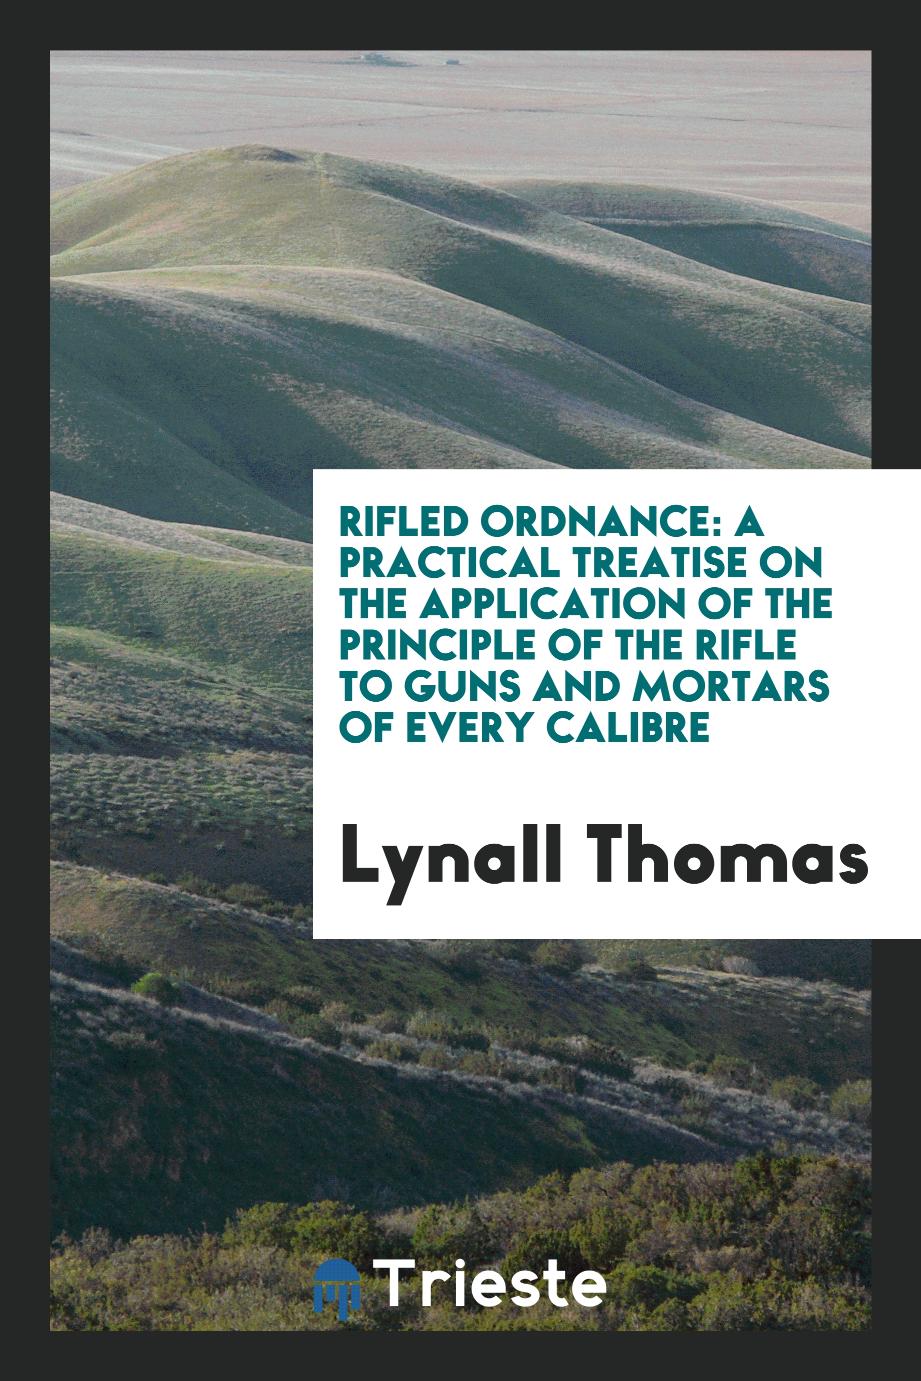 Rifled Ordnance: A Practical Treatise on the Application of the Principle of the Rifle to Guns and Mortars of Every Calibre